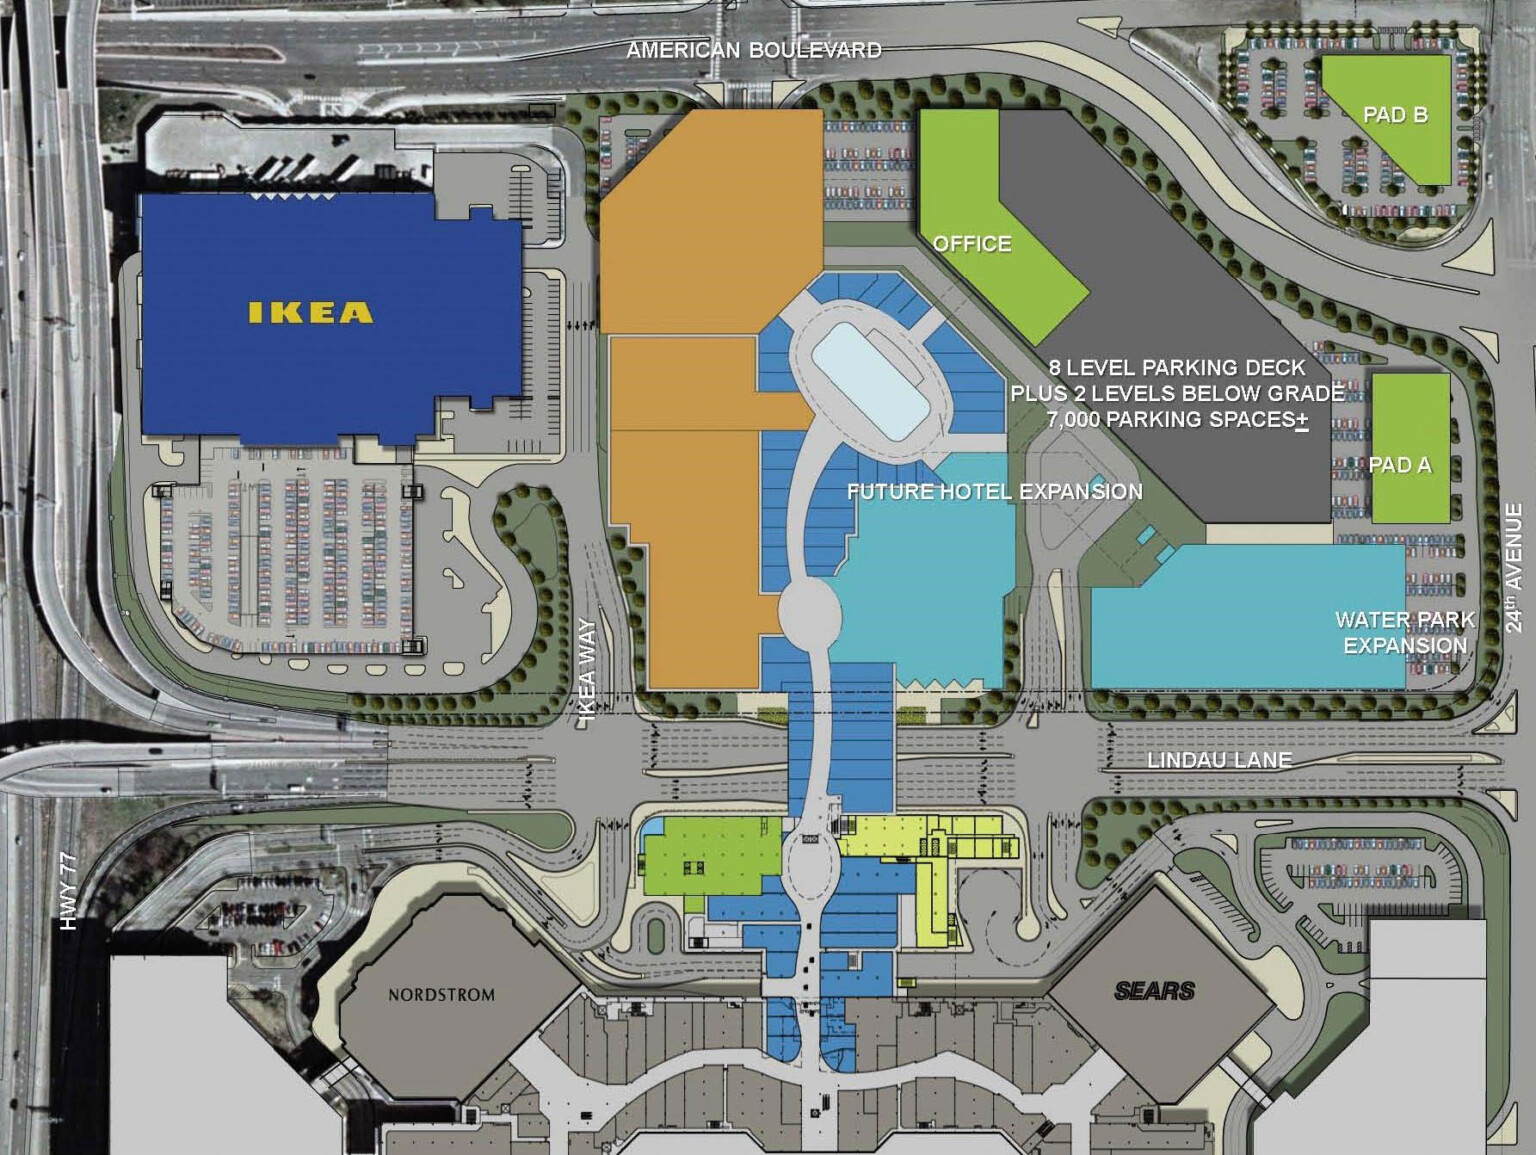 Rendering of the Mall of America showcasing the building layouts